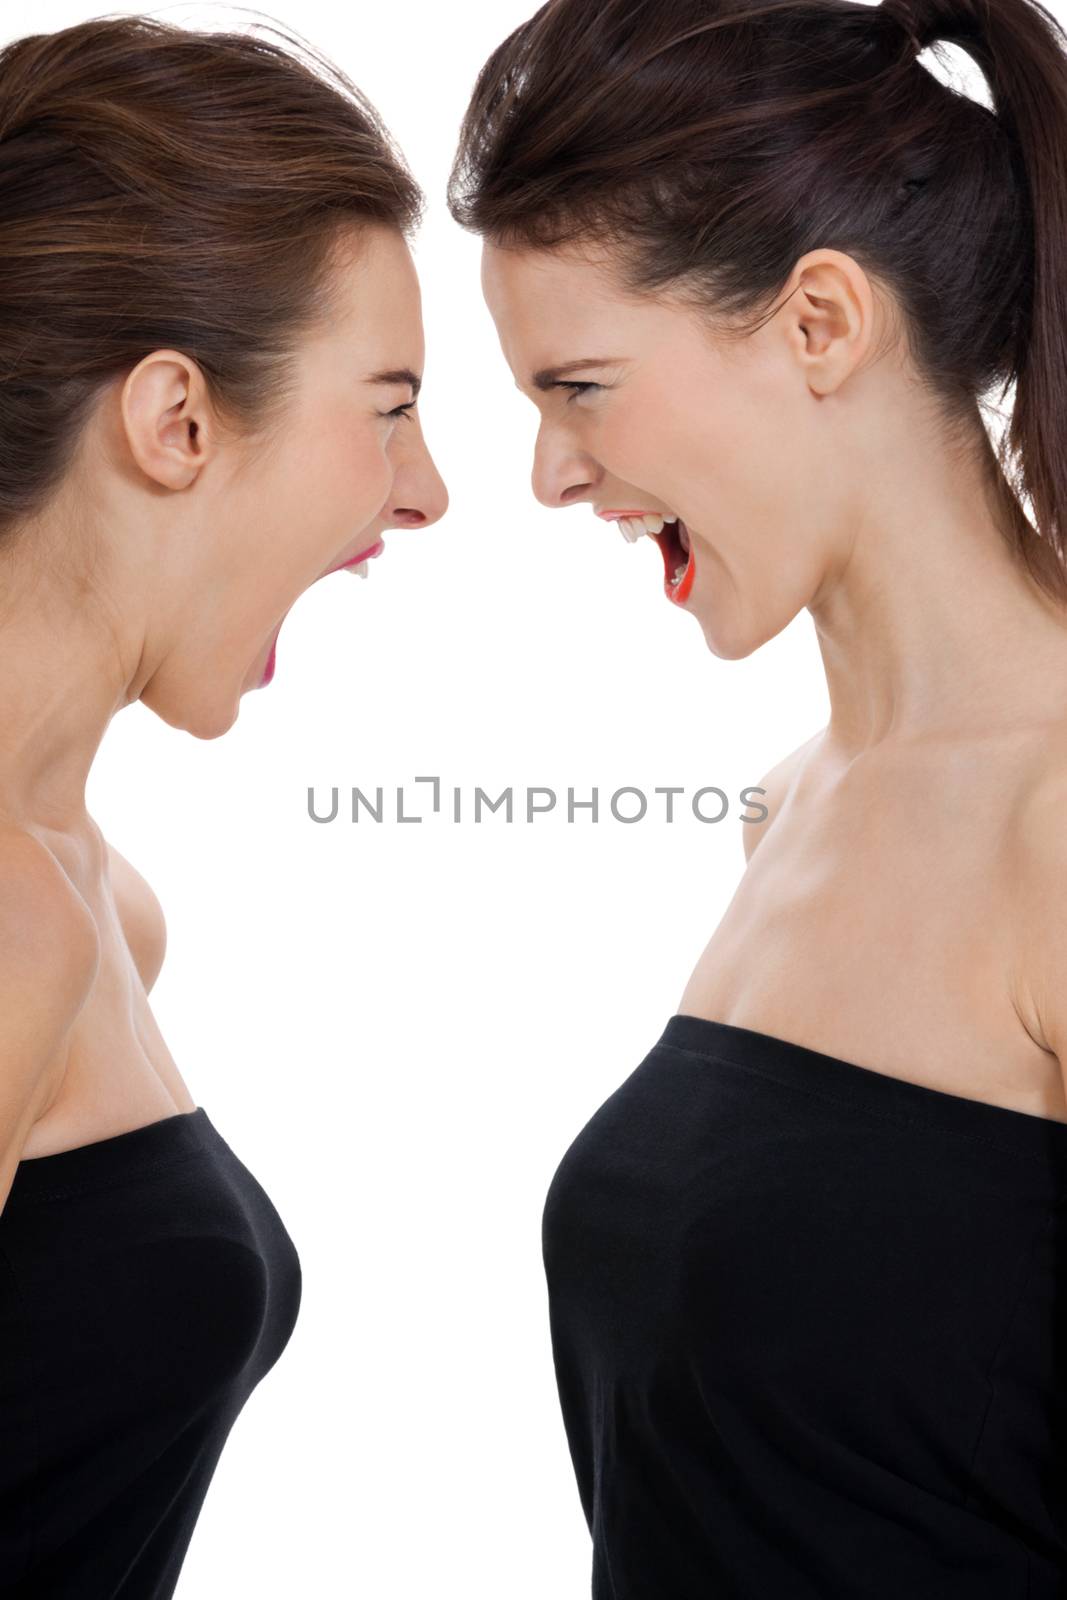 two young girls angry shouting loud isolated on white background